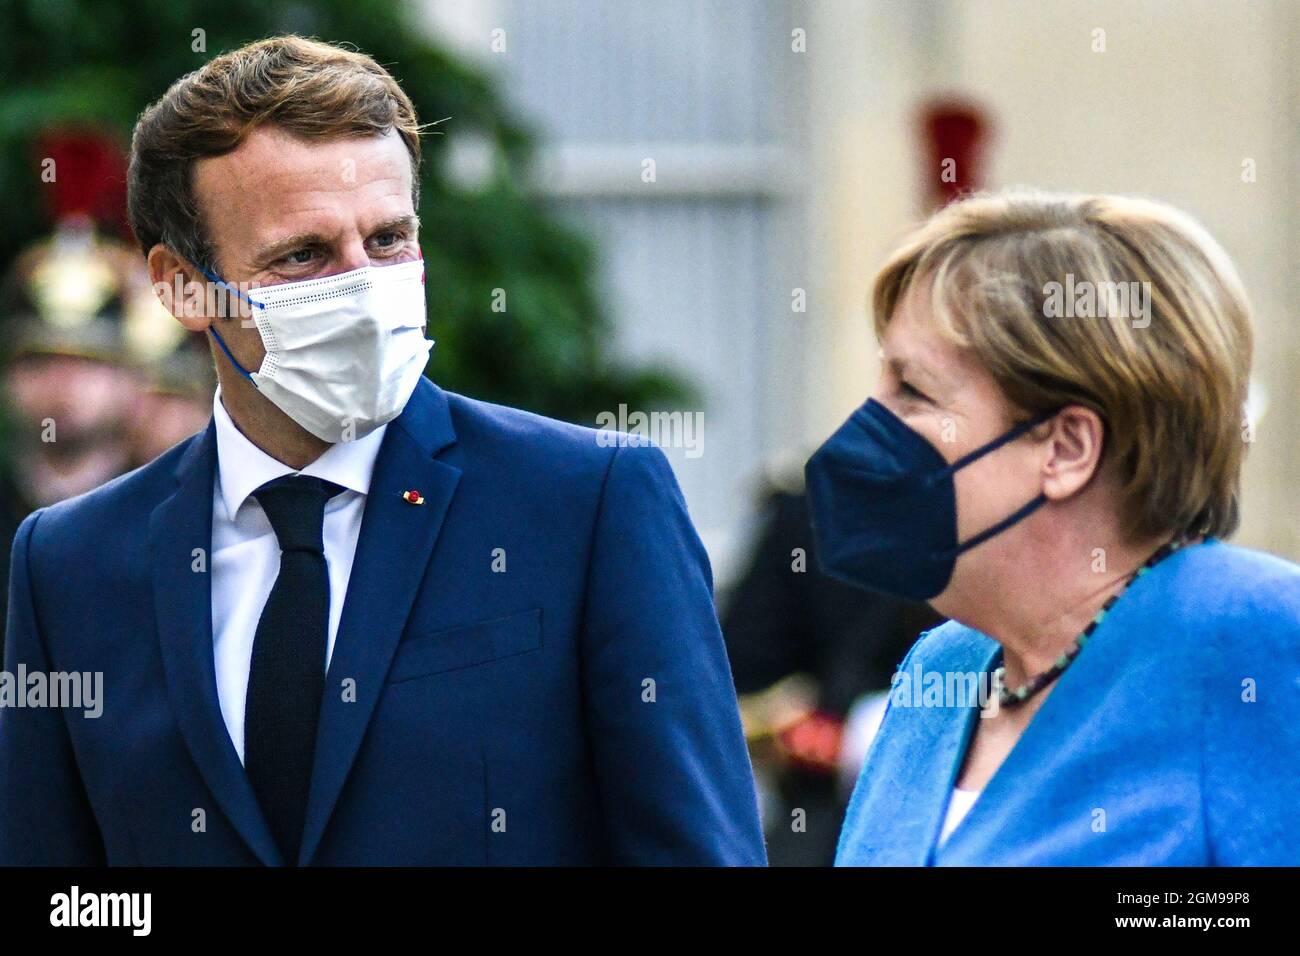 PARIS, FRANCE, 16 SEPTEMBER 2021.  Germany’s Chancellor Angela Merkel is welcomed by France’s President Emmanuel Macron prior to a working dinner at the Elysee Palace. Credit: Amaury Paul / Medialys Images/Sipa USA Stock Photo